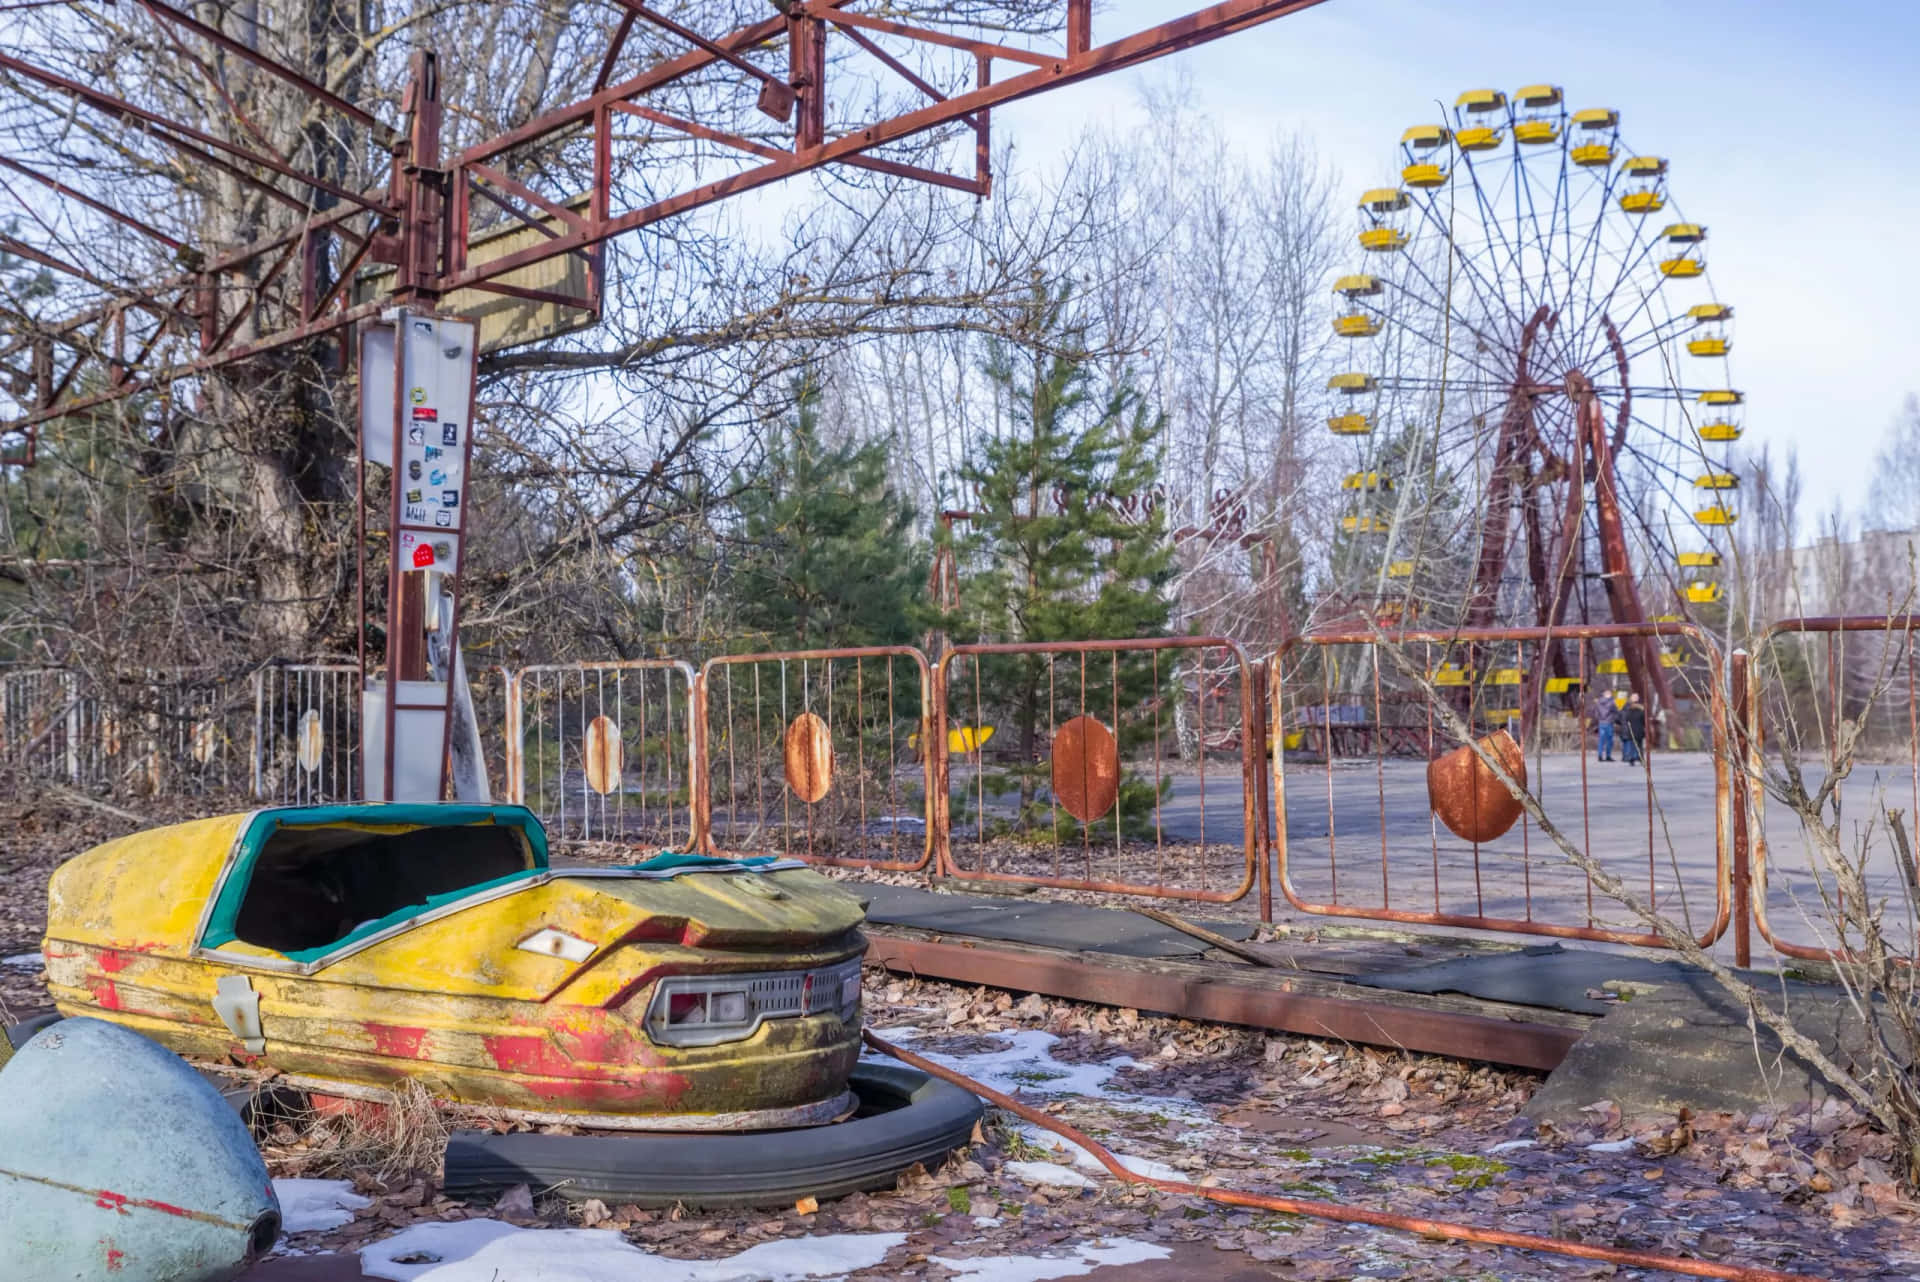 Abandoned Ferris Wheel In A Deserted Area